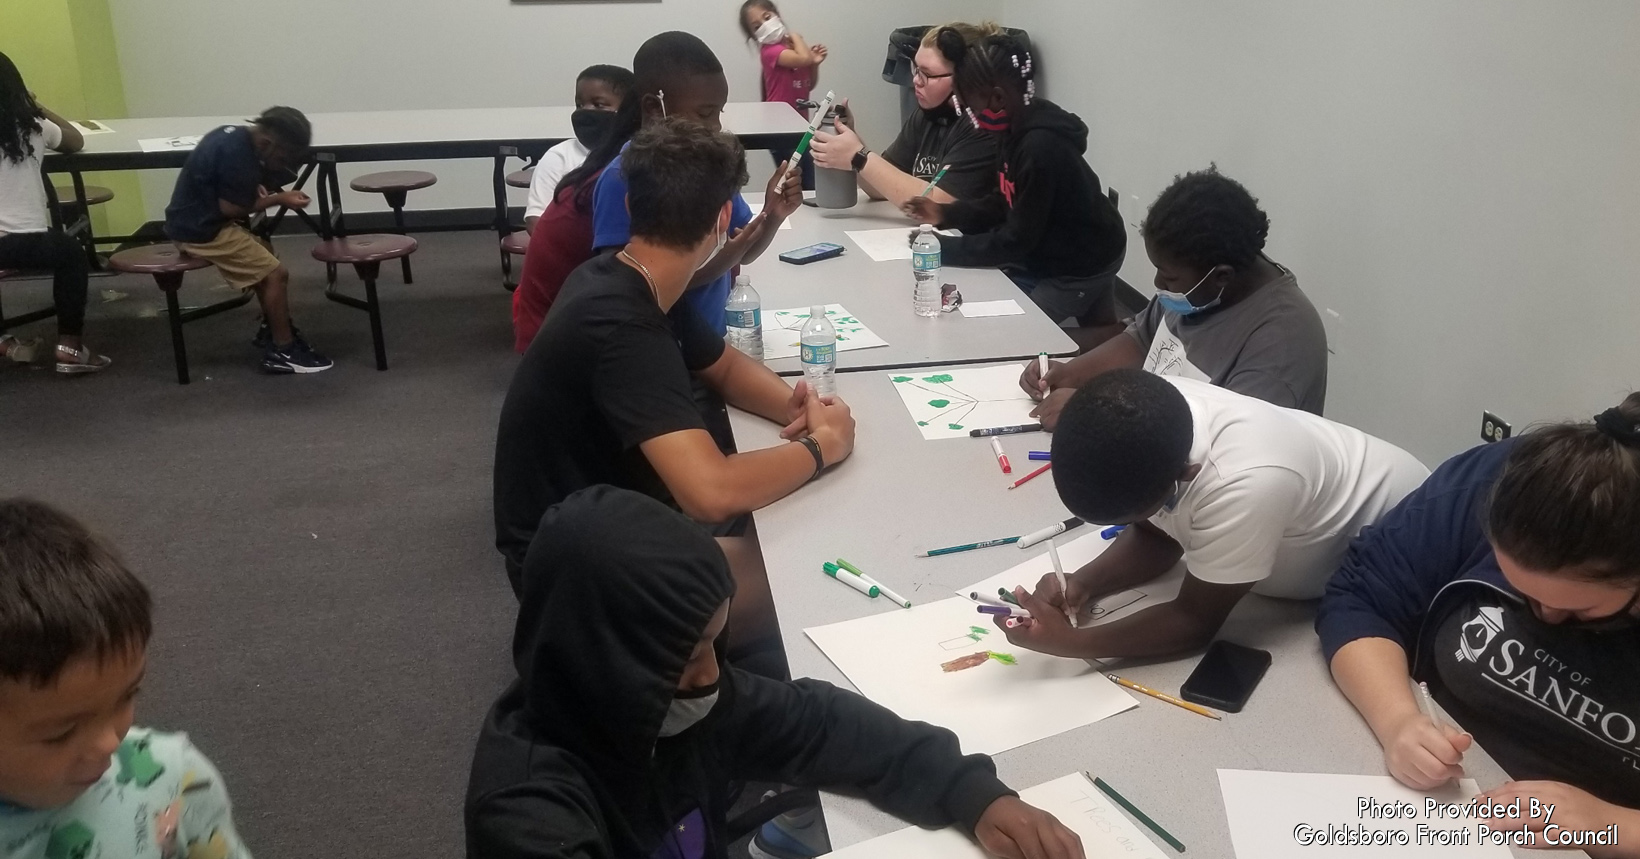 Eastside and Westside Mentoring helps to provide tutoring programs for the youth. The programs focus on the ACT, SAT, and regular academic courses.